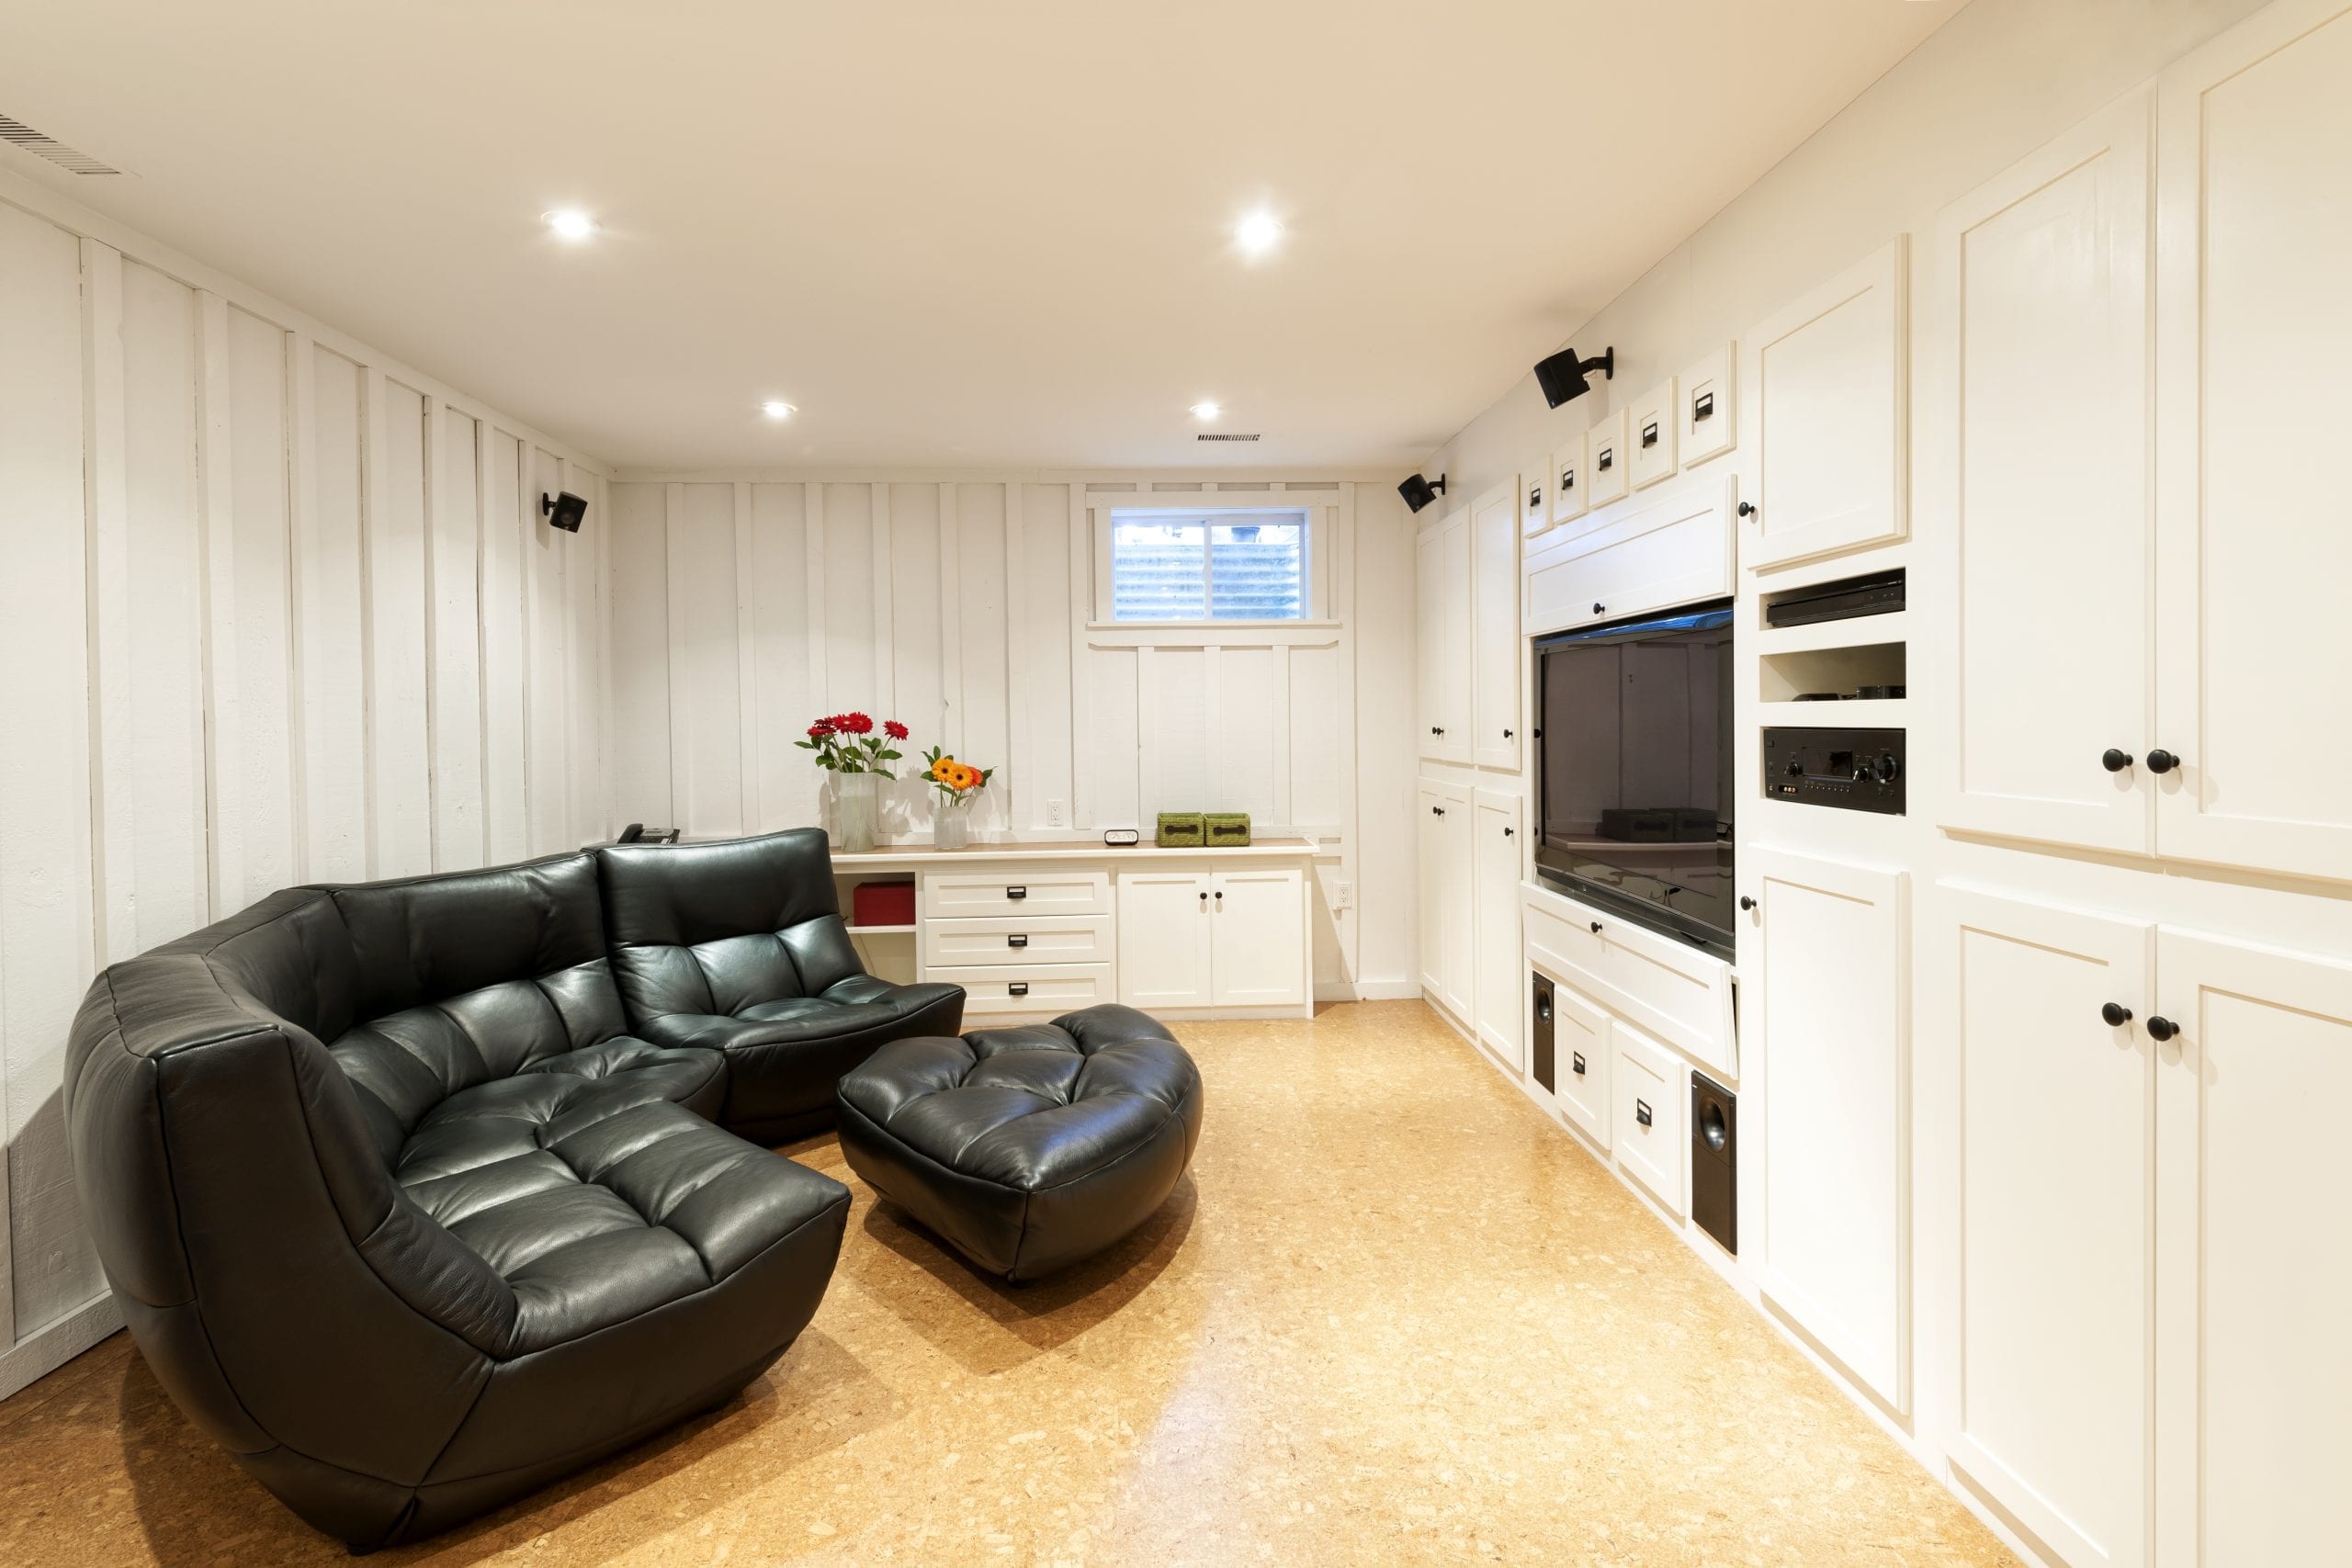 An innovative garage conversion by Praiano Home Improvement, showing a garage transformed into a vibrant living space